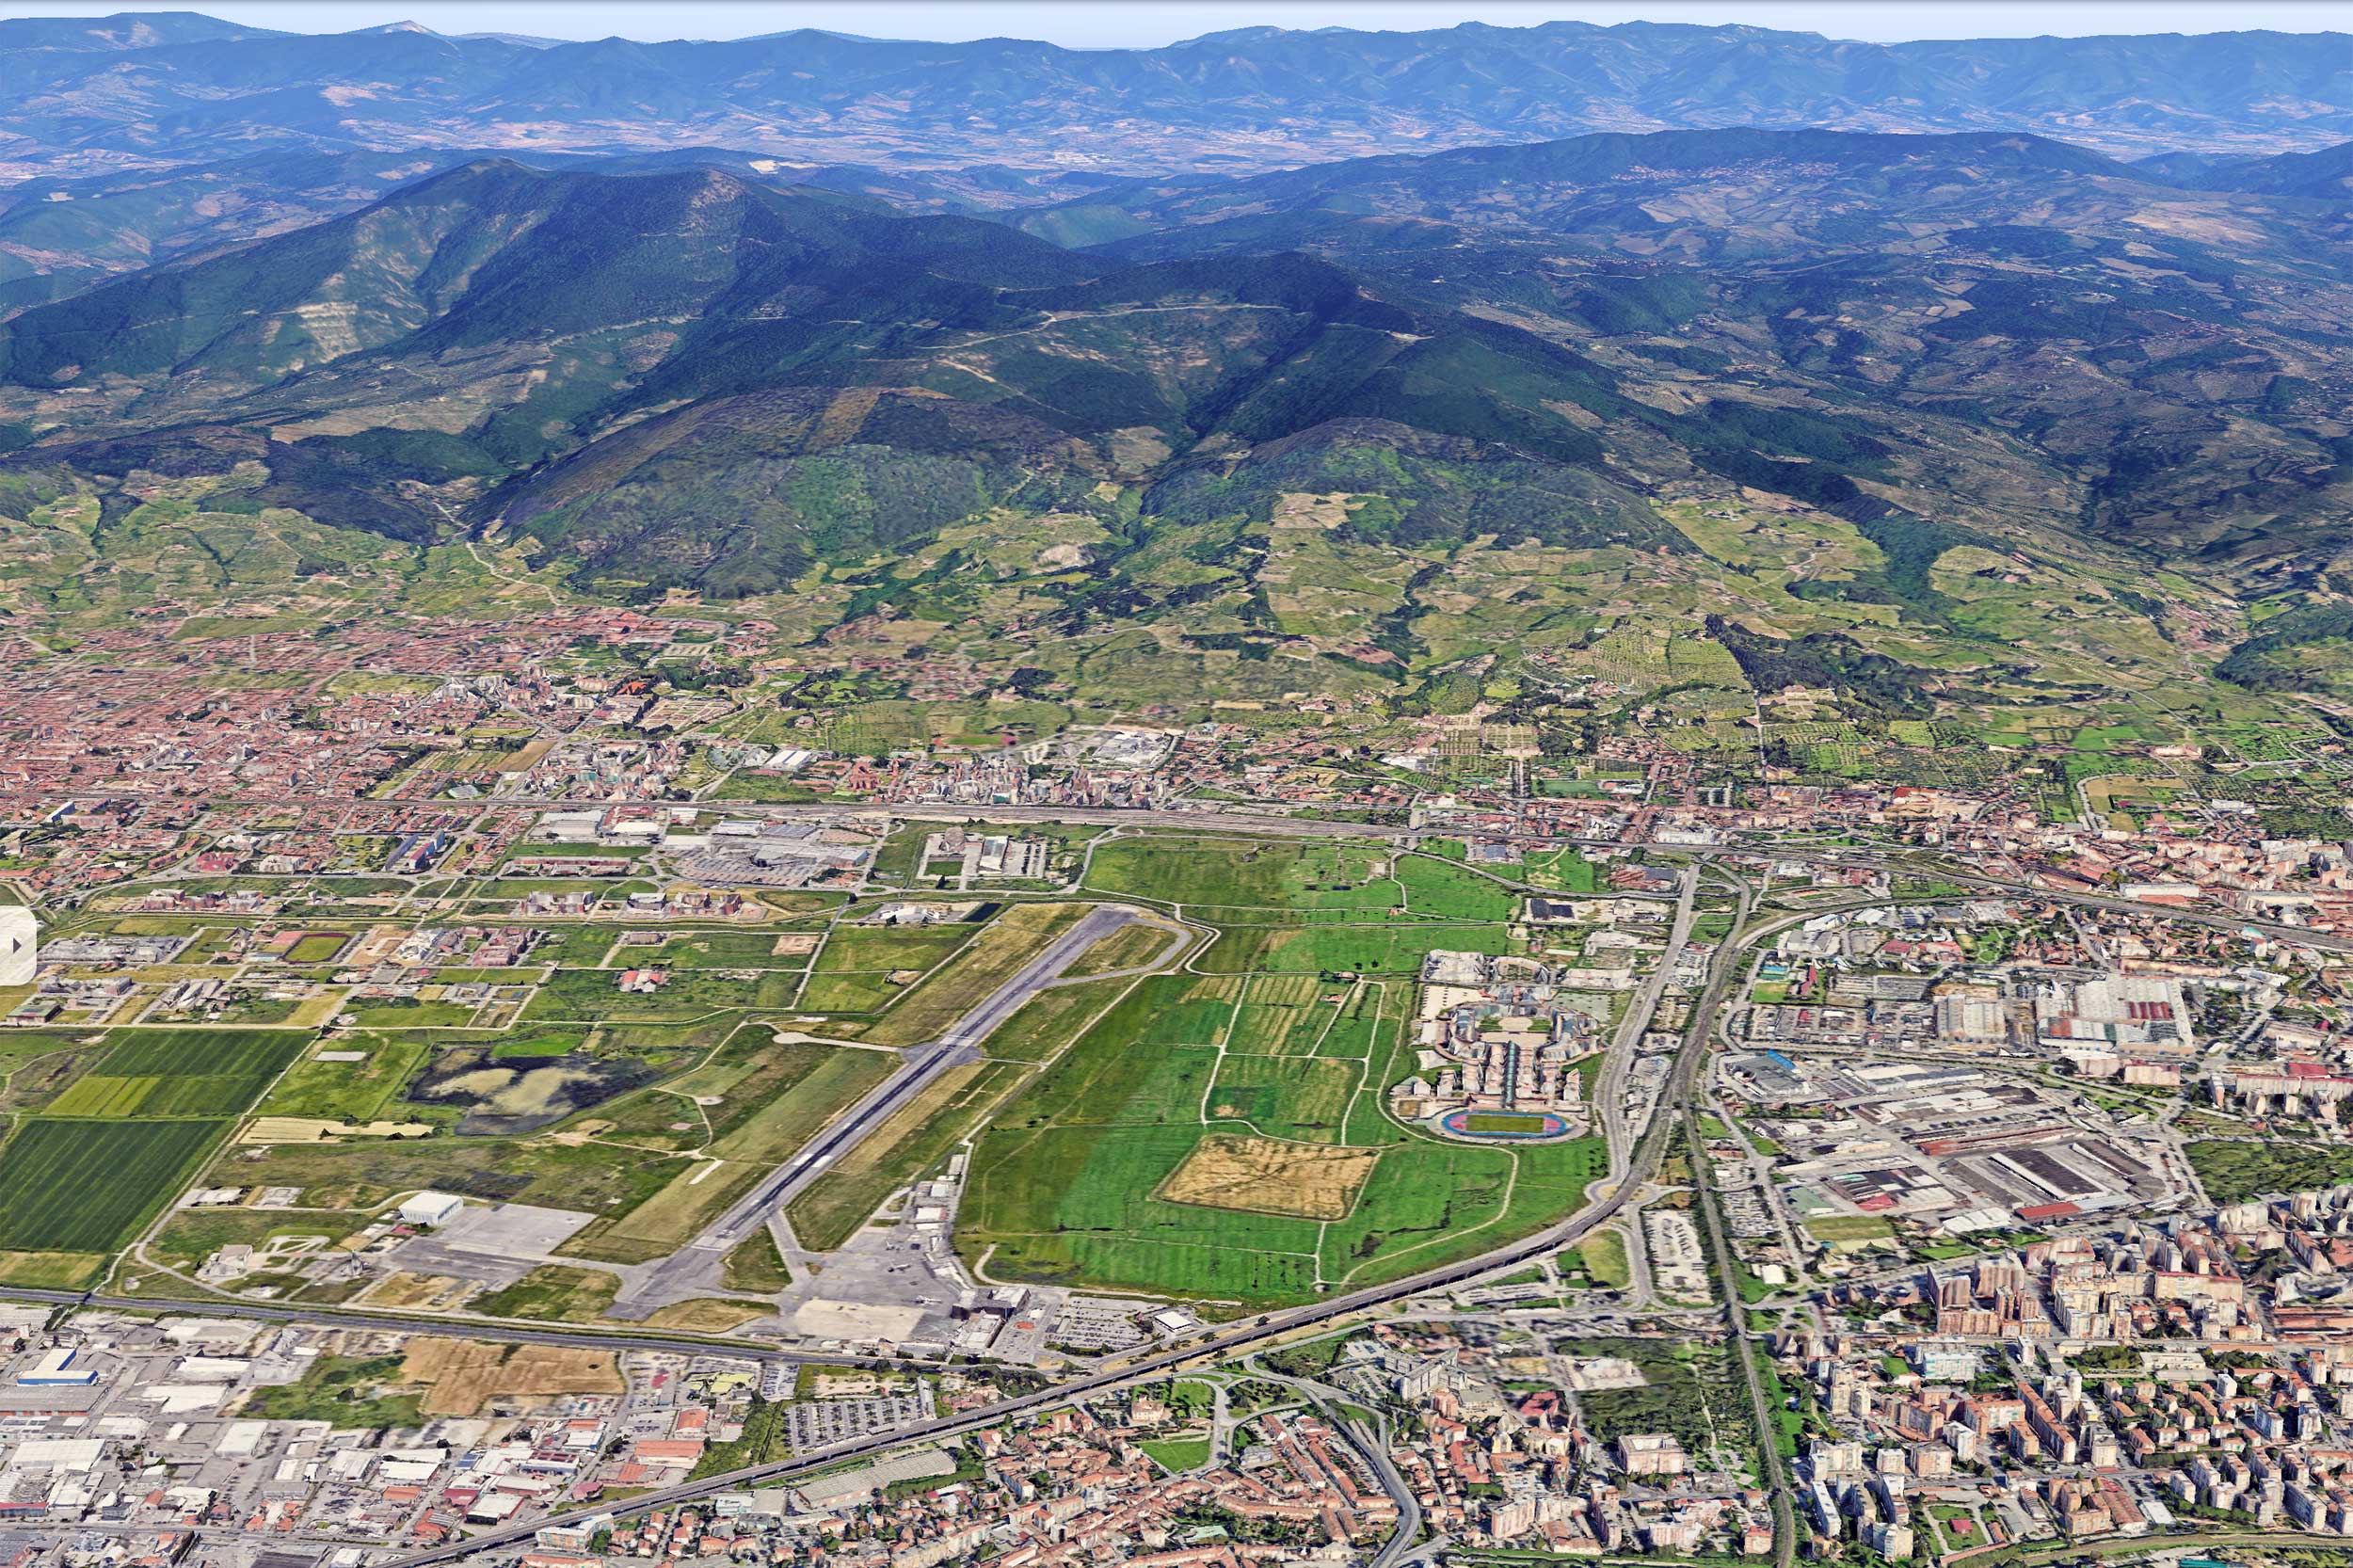 This is how Florence Airport looks at the mome nt with the runway pointing straight at the mountains. Image: Google 